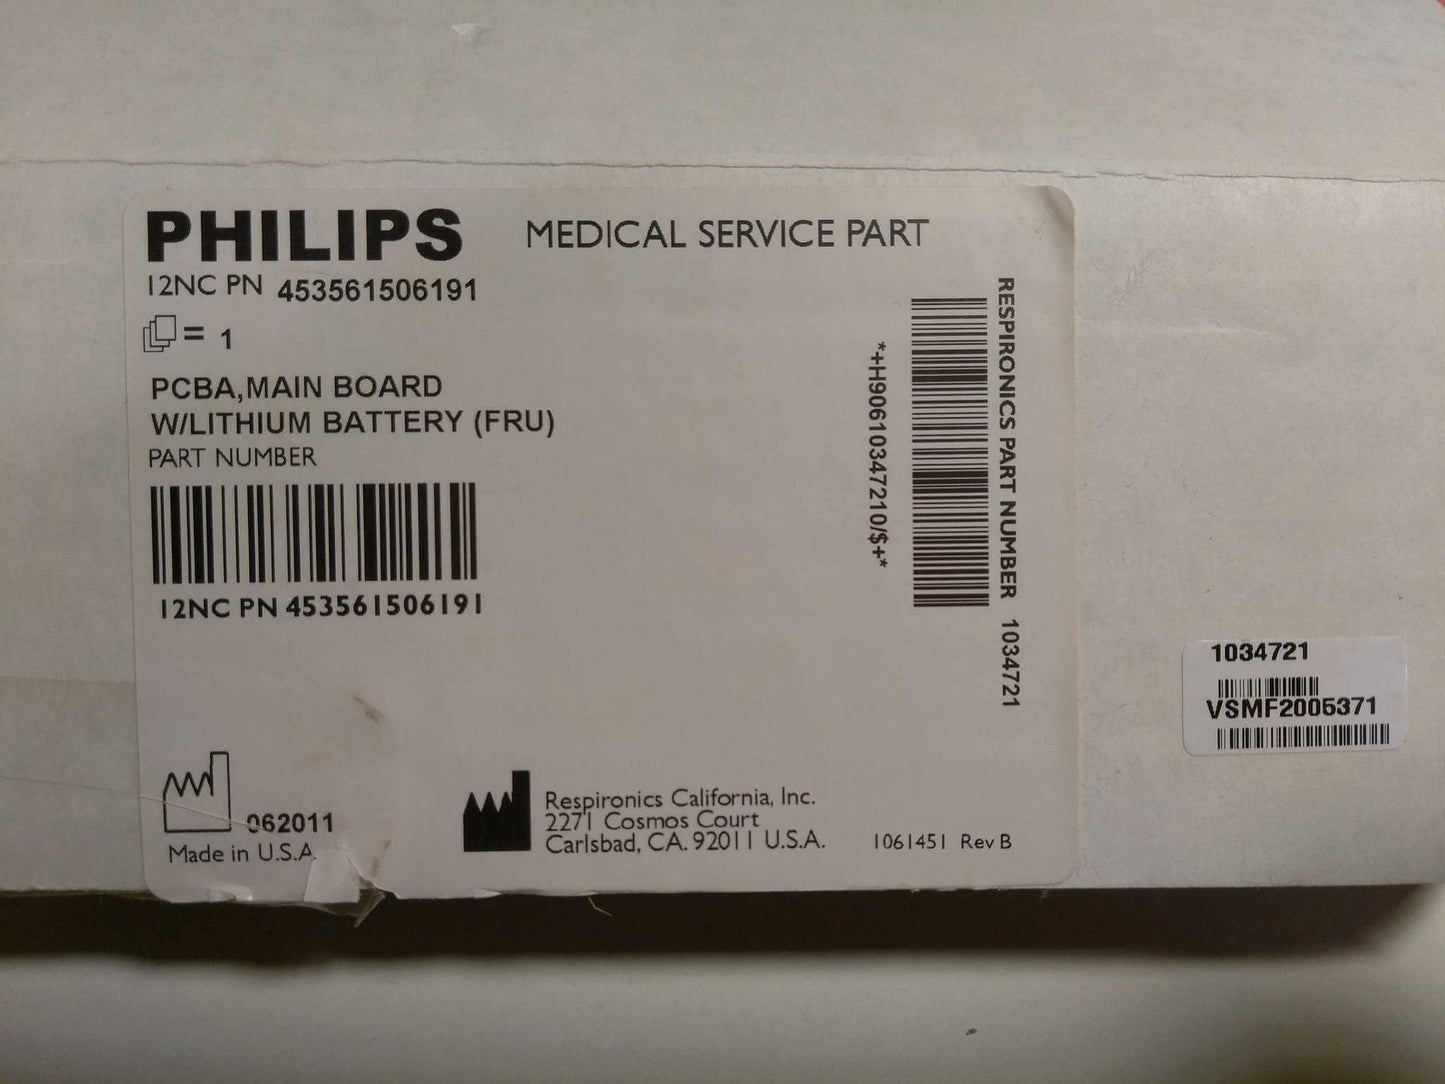 Used Philips Esprit 1034721 PCBA Main Board VSMF2005371 W/ Lithium Battery - MBR Medicals